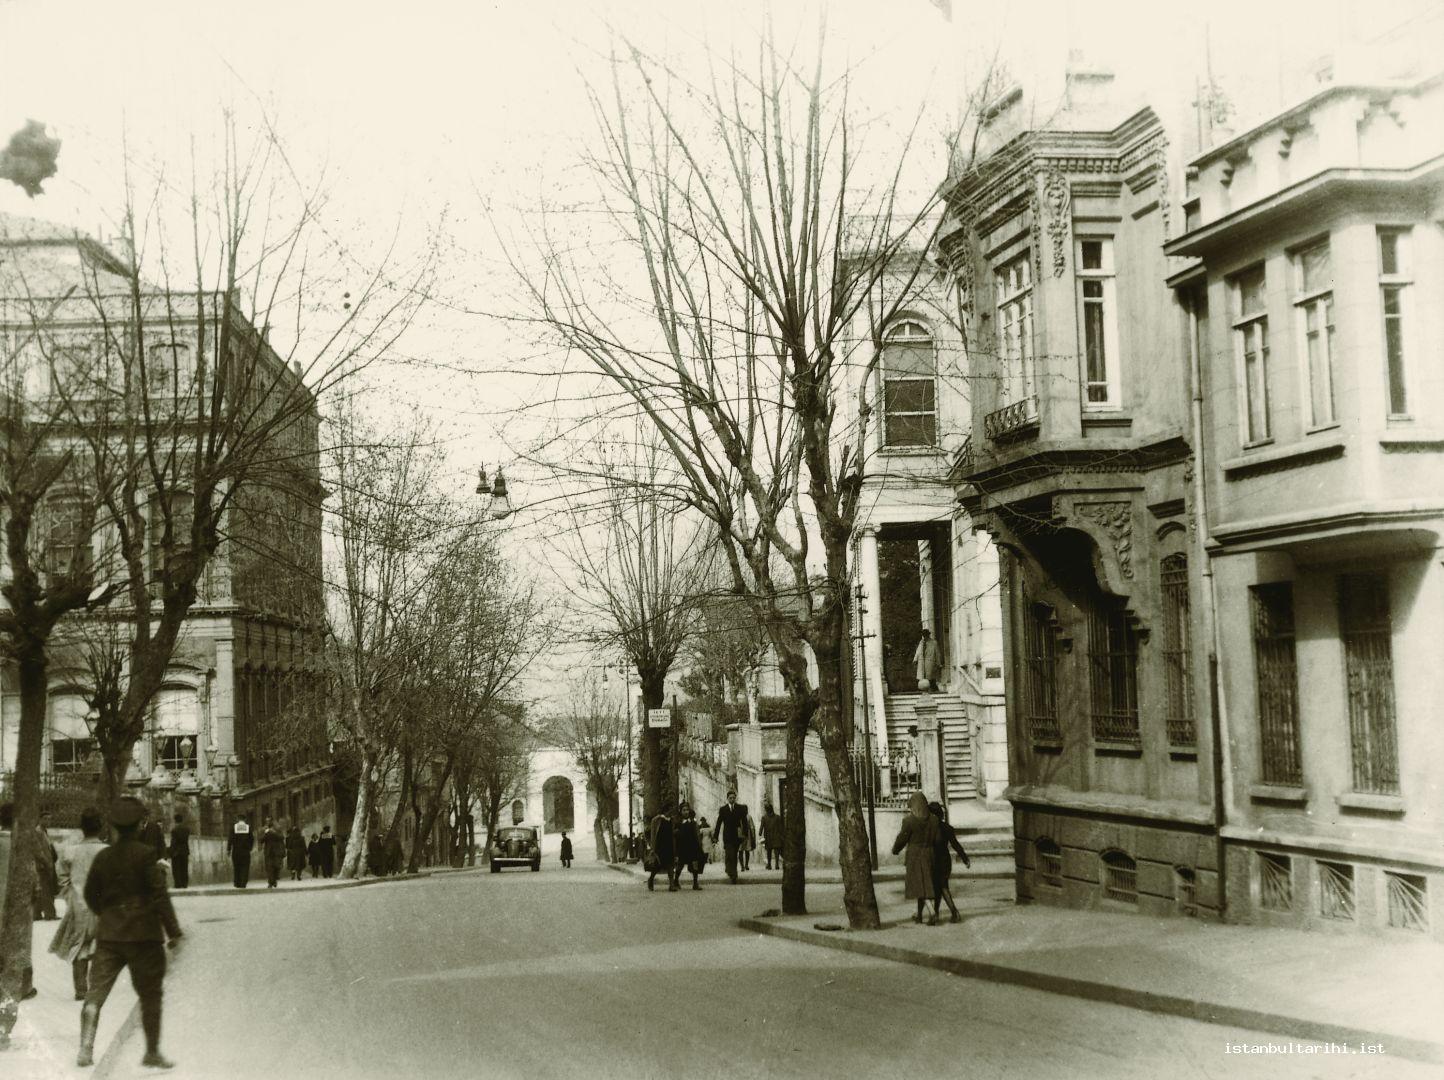 11- The slope going down from Cağaloğlu to Sirkeci which is currently called Ankara Street. Once journalists used to call it “Our Street” because it was the place where bookstores and publishers settled and journalists preferred it due to its proximity to Sublime Porte.